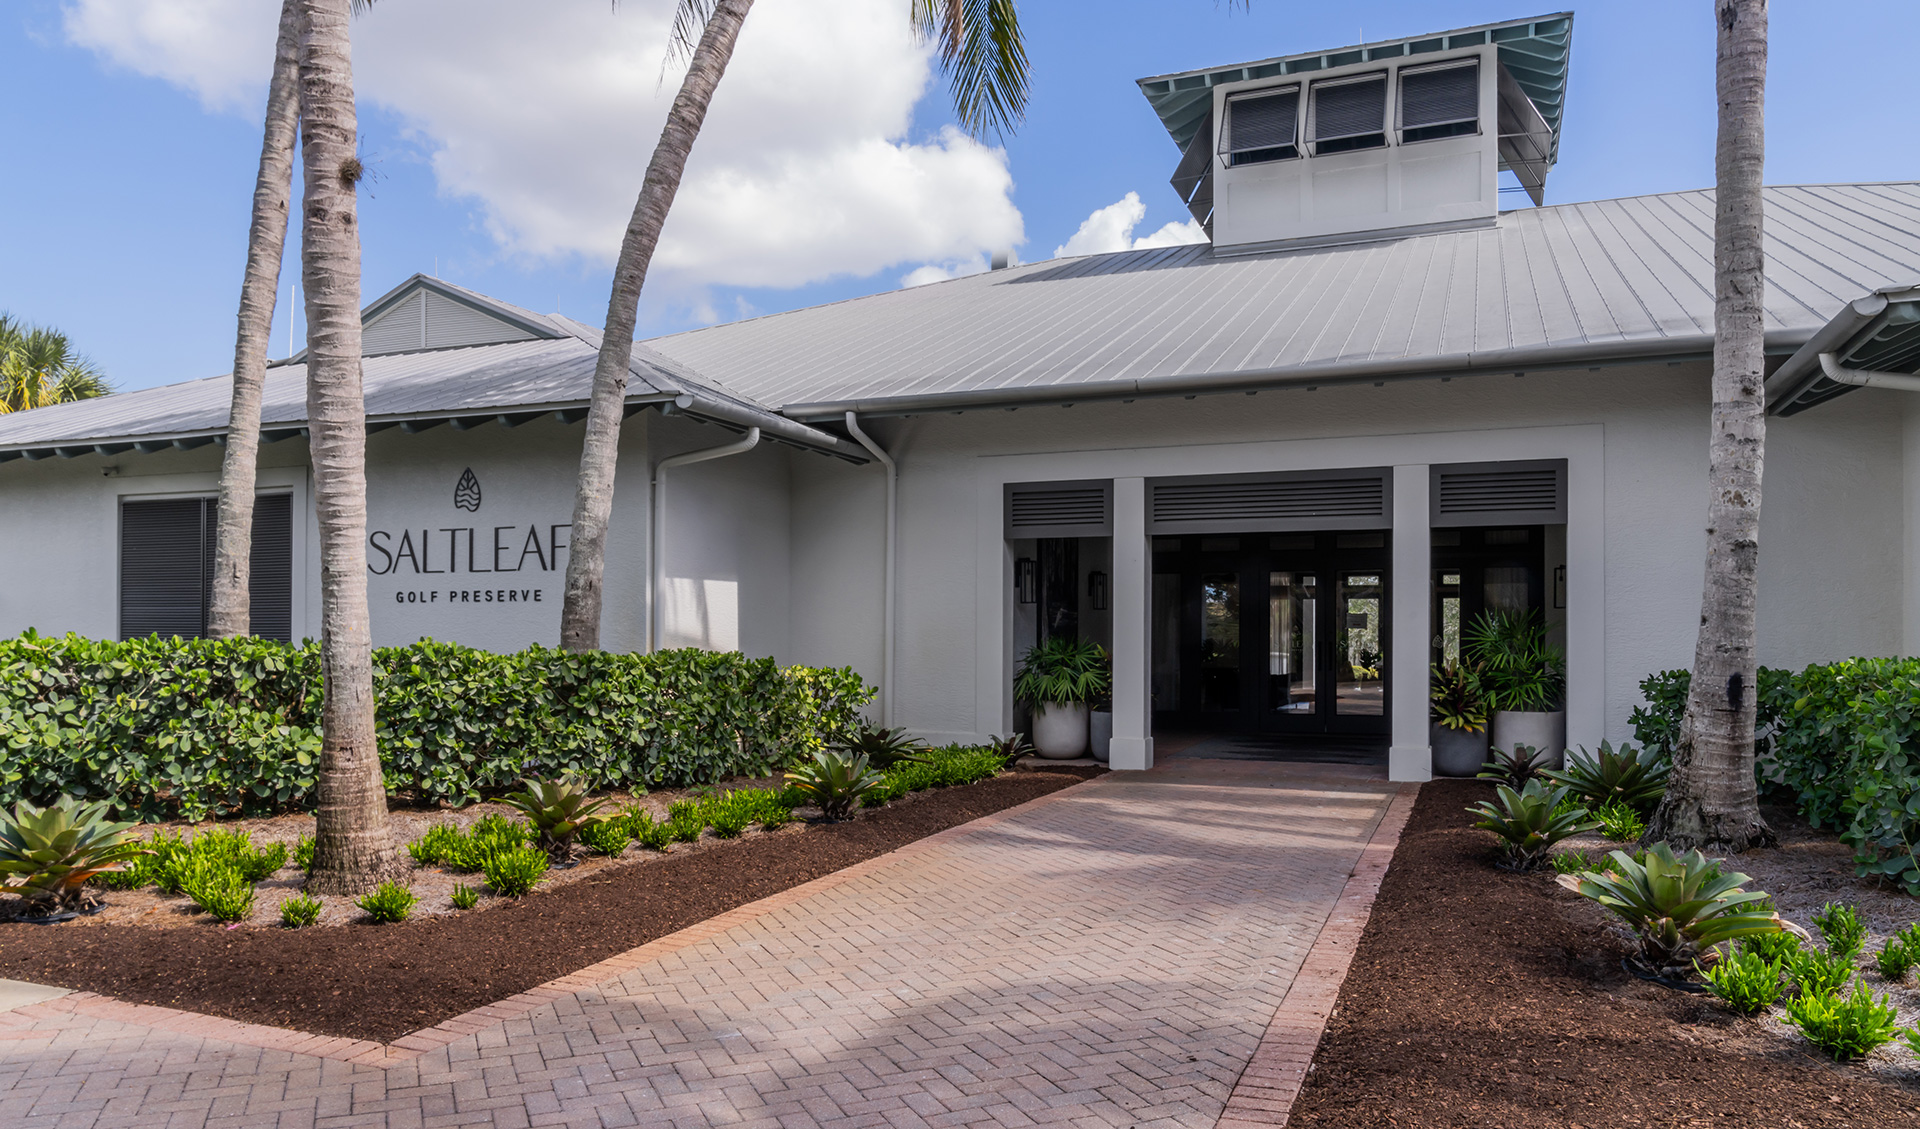 The entrance to the Saltleaf Golf Preserve building in Bonita Springs, with palm trees and bushes.